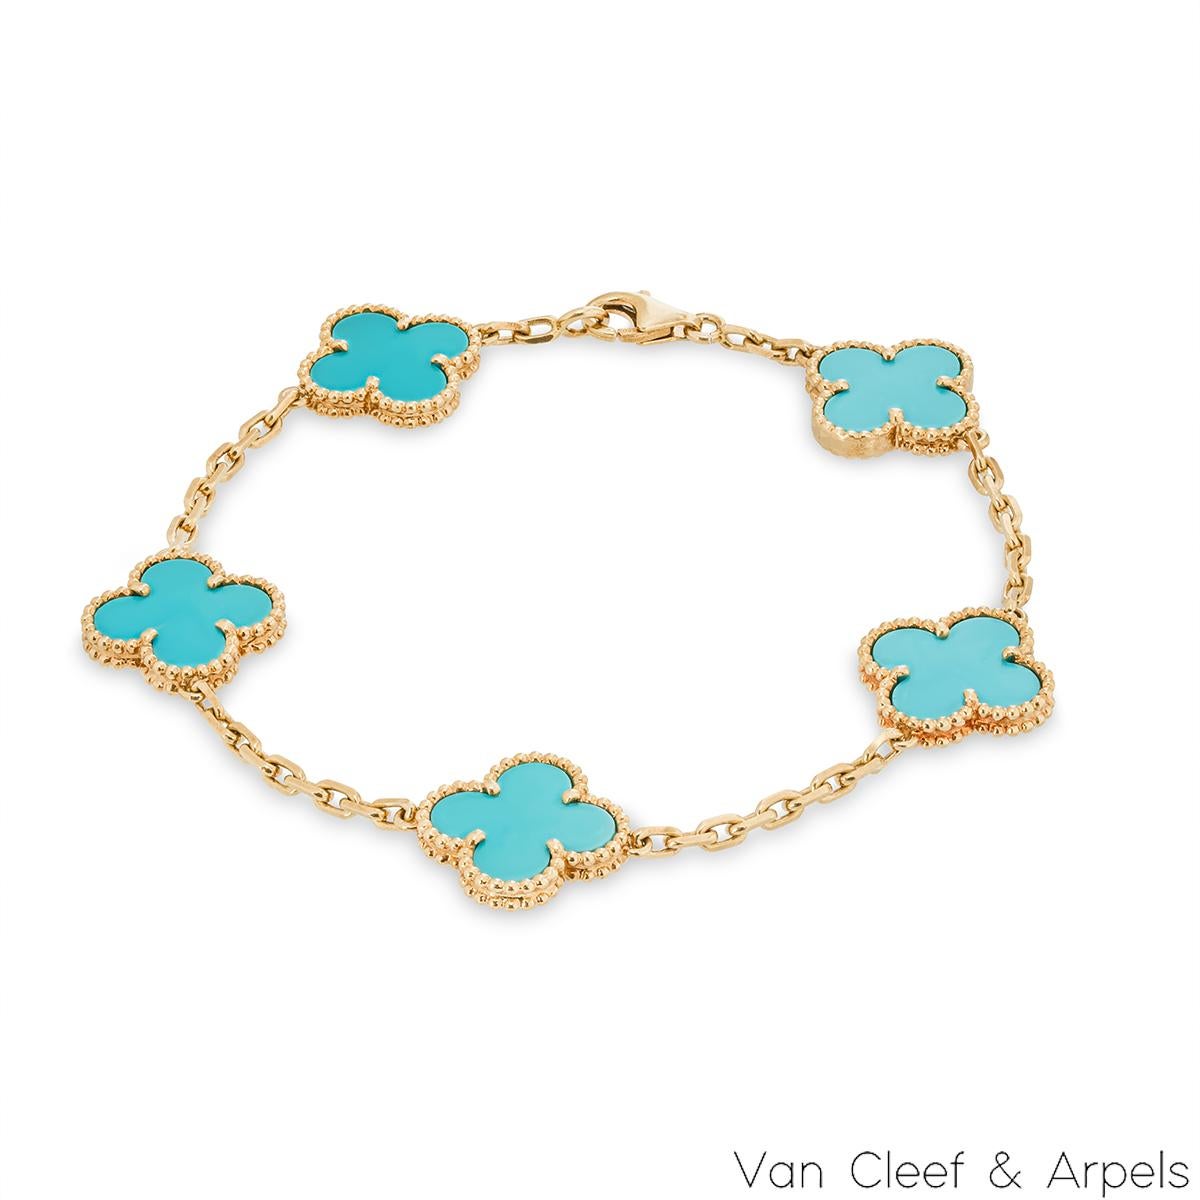 A rare 18k yellow gold turquoise bracelet by Van Cleef & Arpels from the Vintage Alhambra collection. The bracelet features 5 iconic 4 leaf clover motifs, each set with a beaded edge and a turquoise inlay, set throughout the length of the chain. The